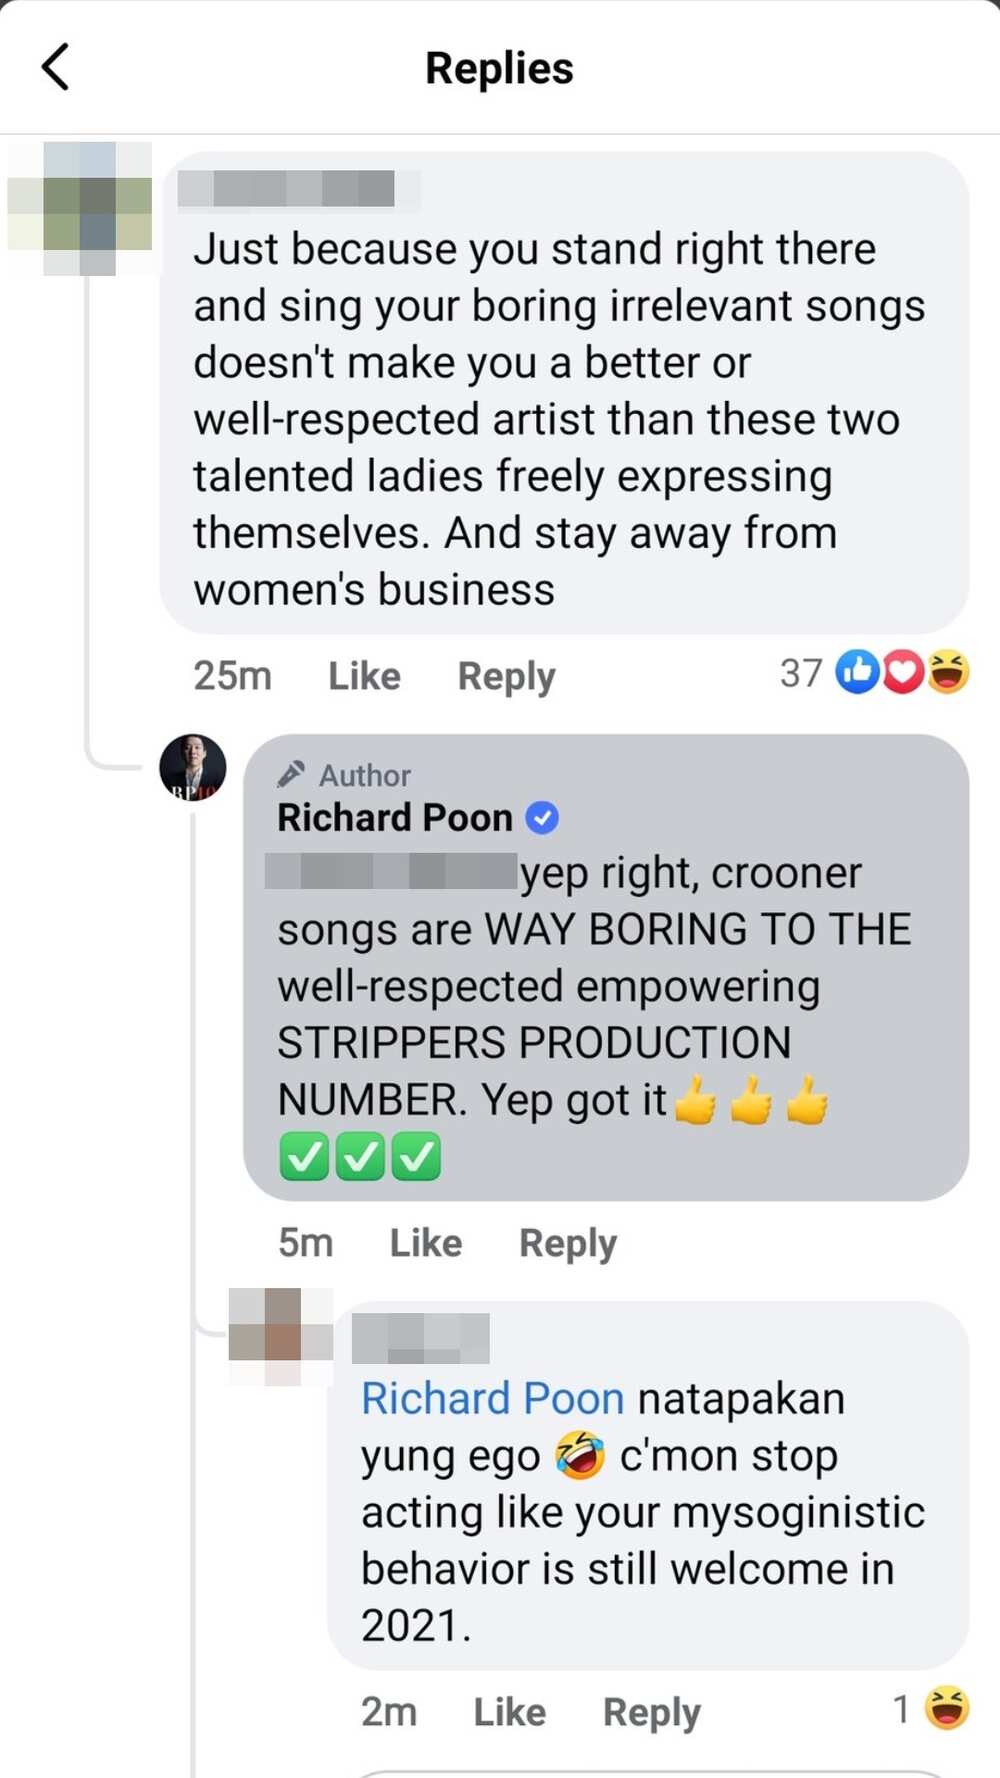 Richard Poön's controversial comment about Cardi B, Megan Stallion's Grammy performance goes viral